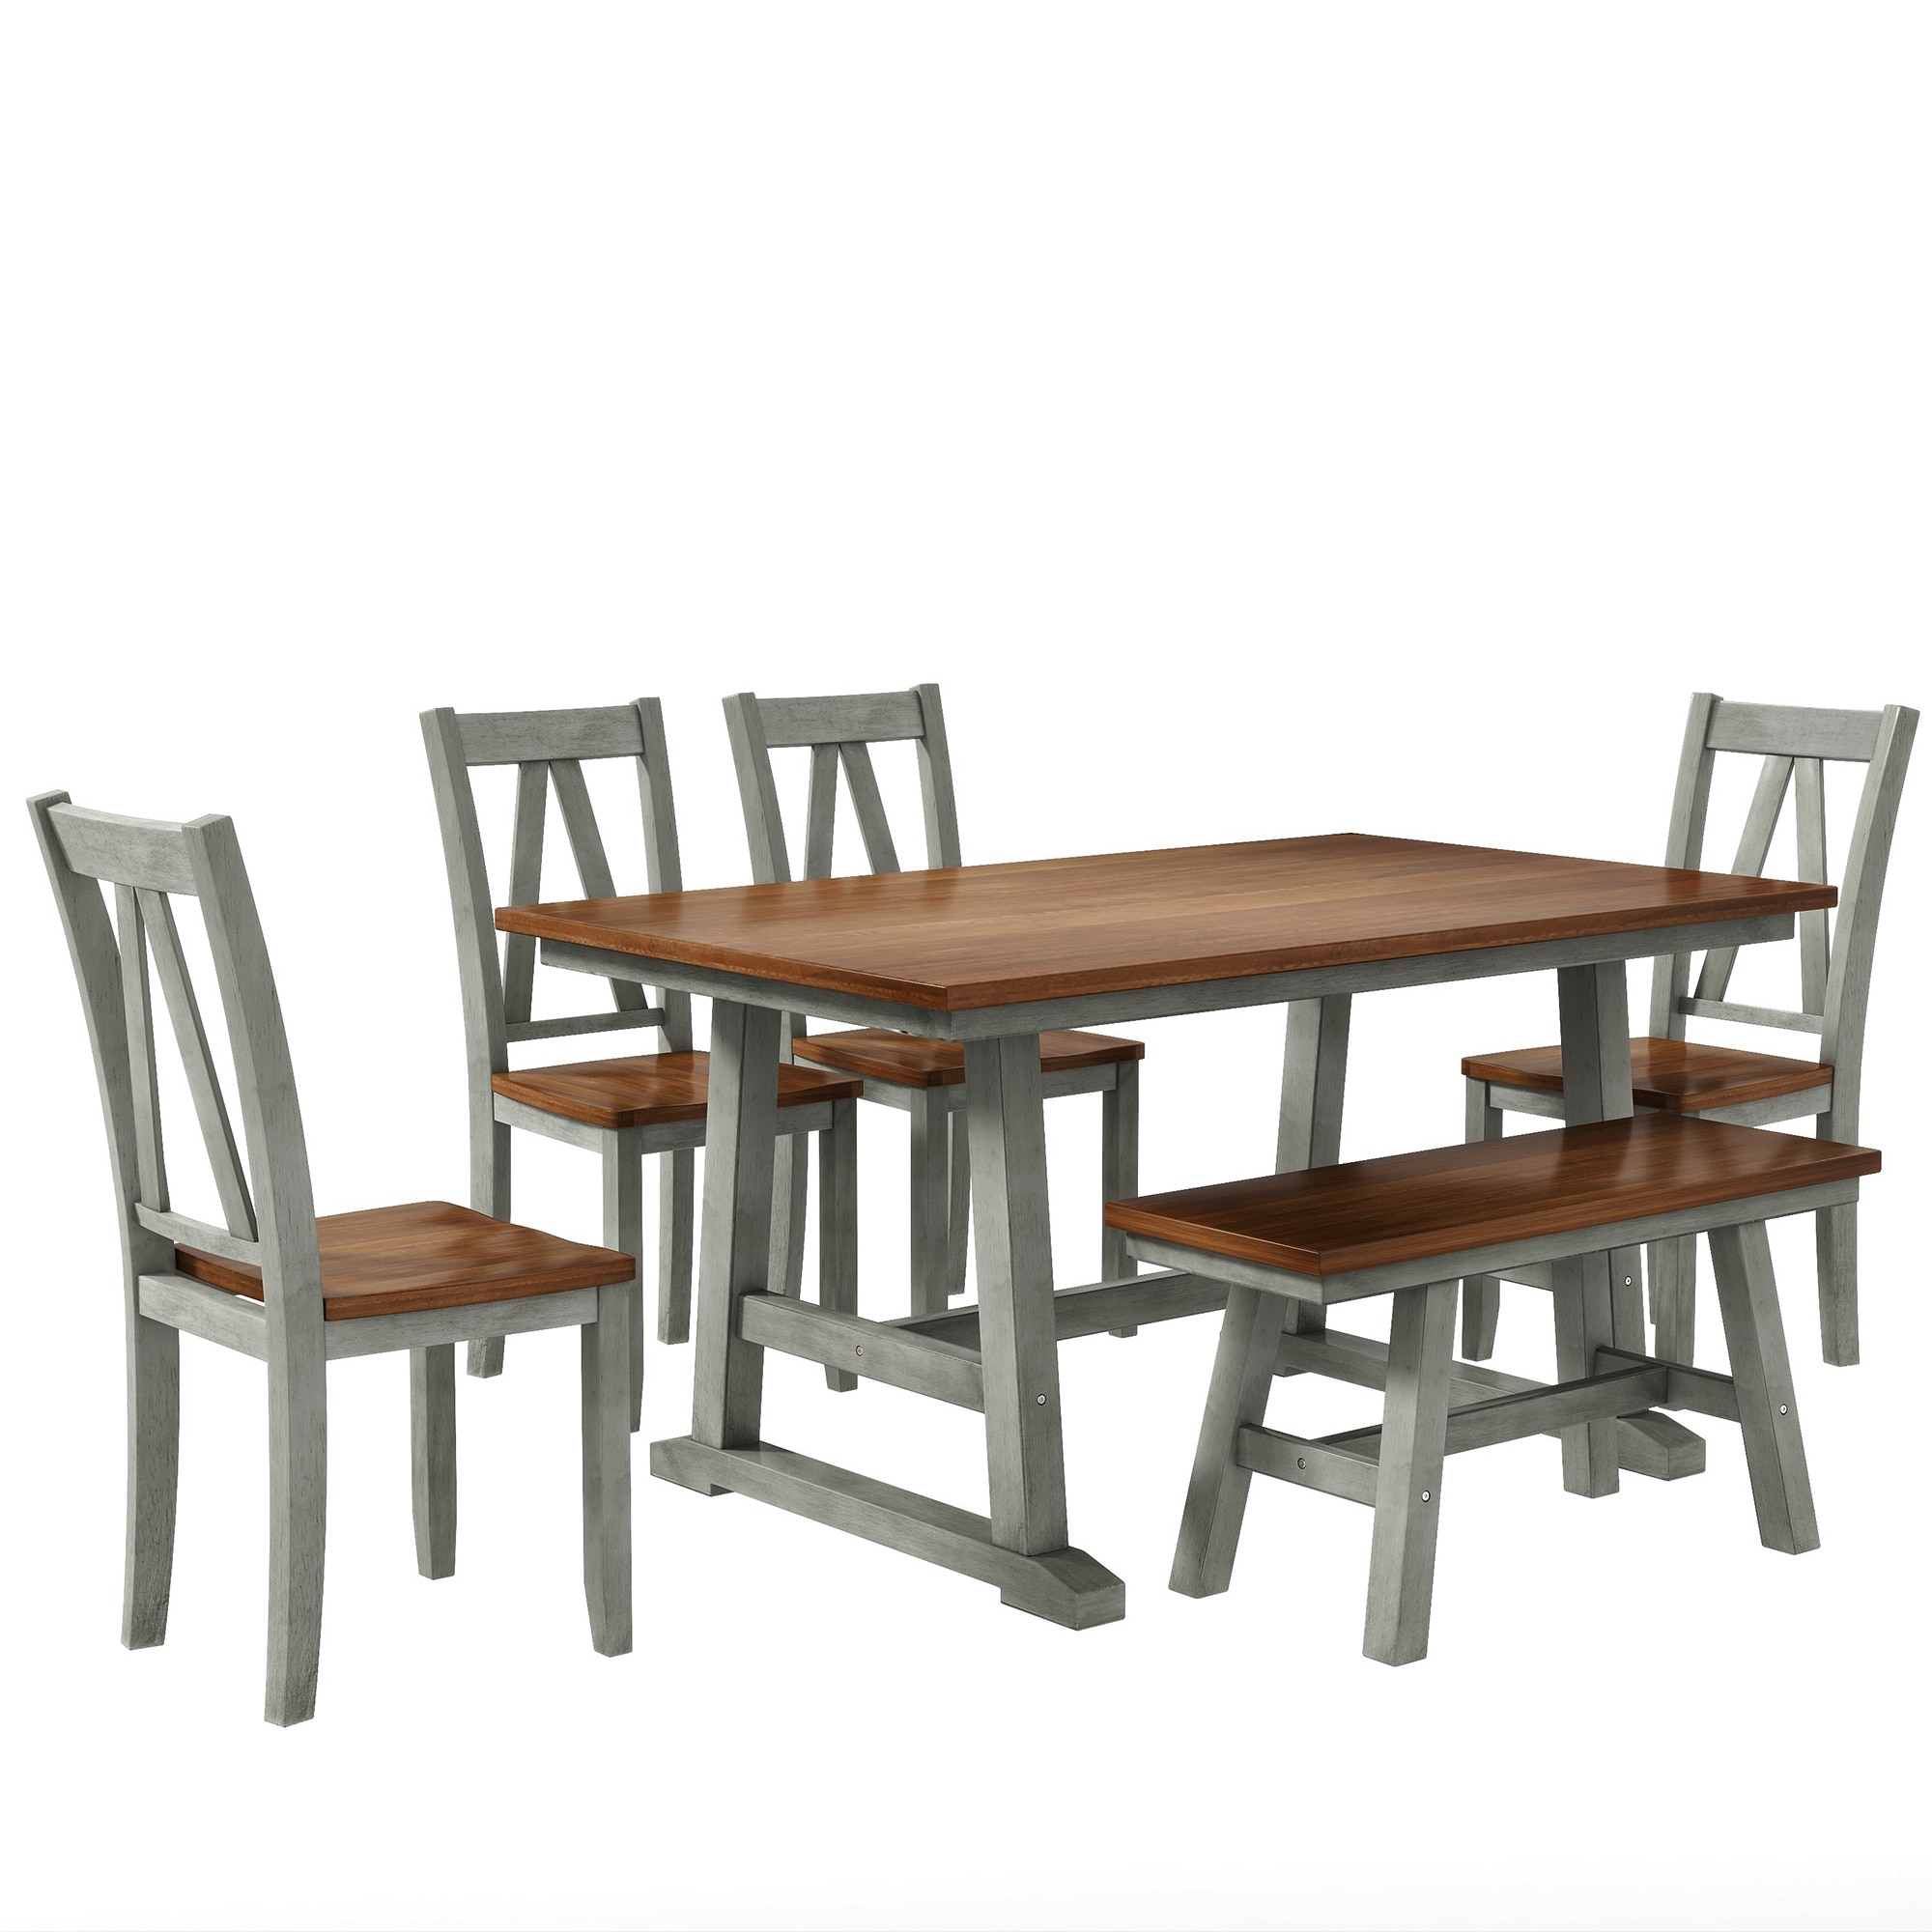 6-Piece Wood Dining Table Set with Long Bench and 4 Dining Chairs